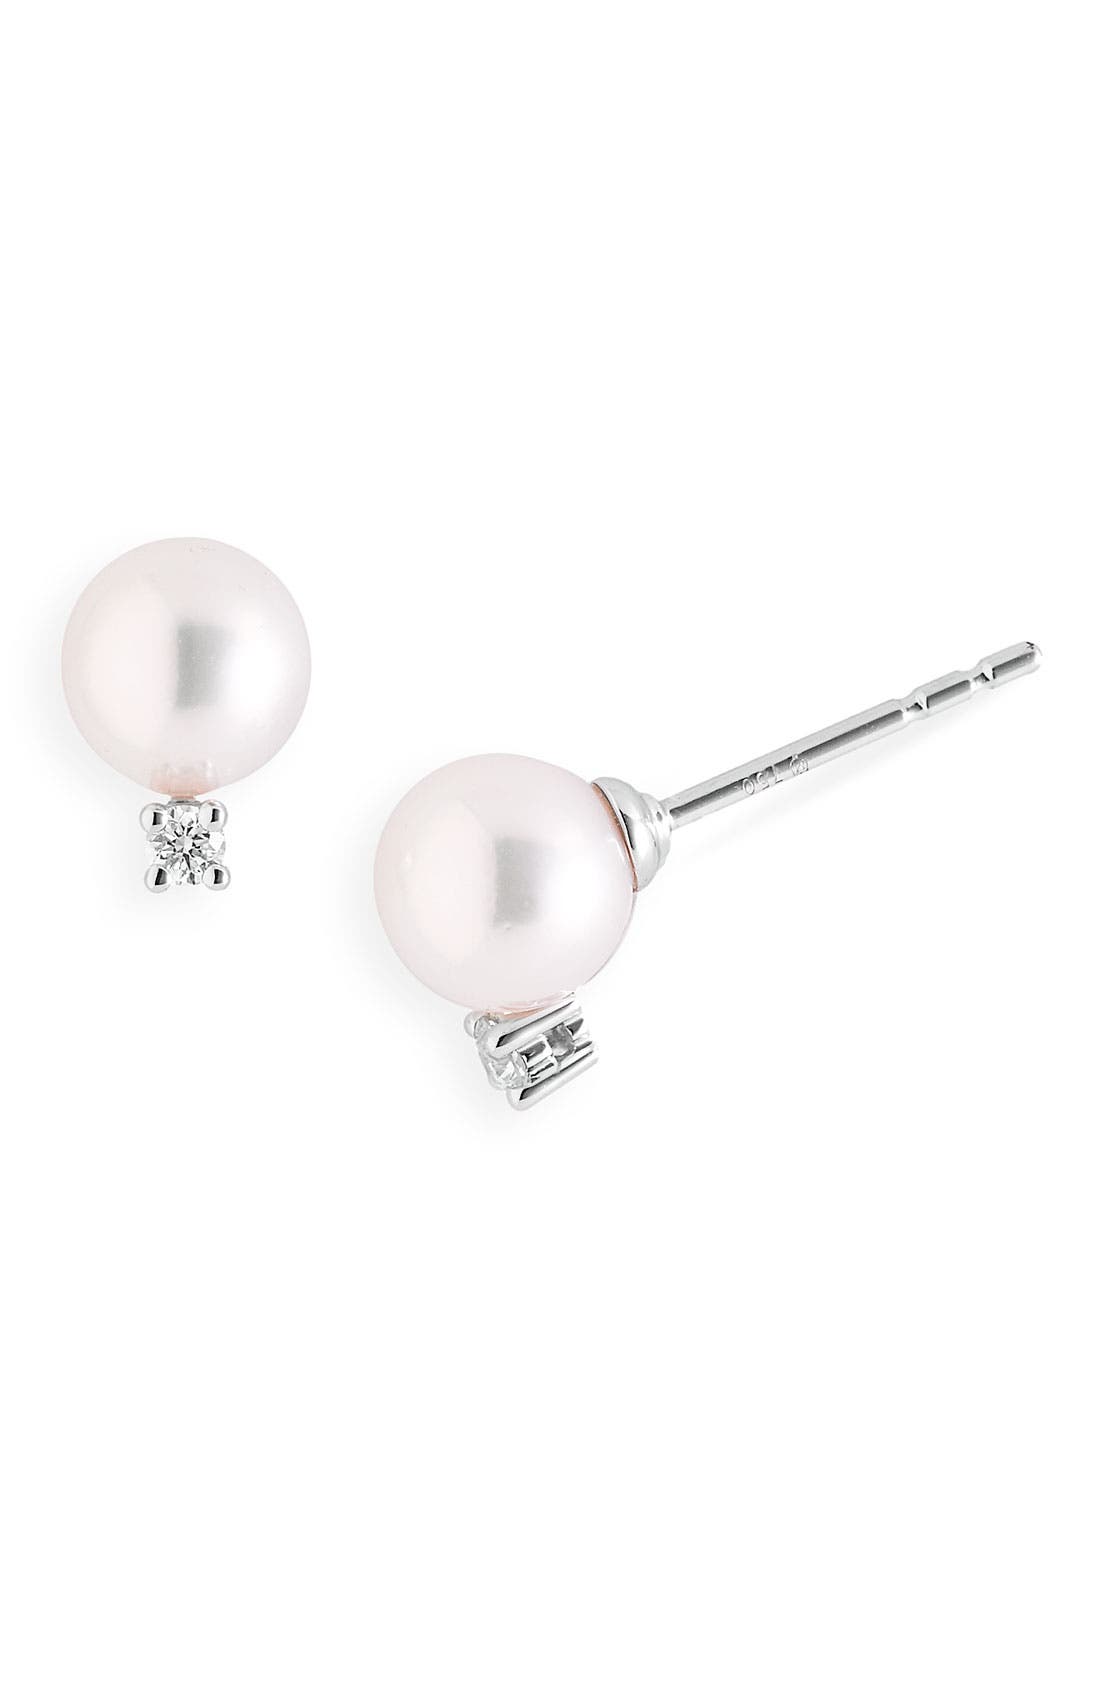 Ross-Simons 7-7.5mm Cultured Akoya Pearl and .10 ct Diamond Earrings in 14kt White Gold t.w 